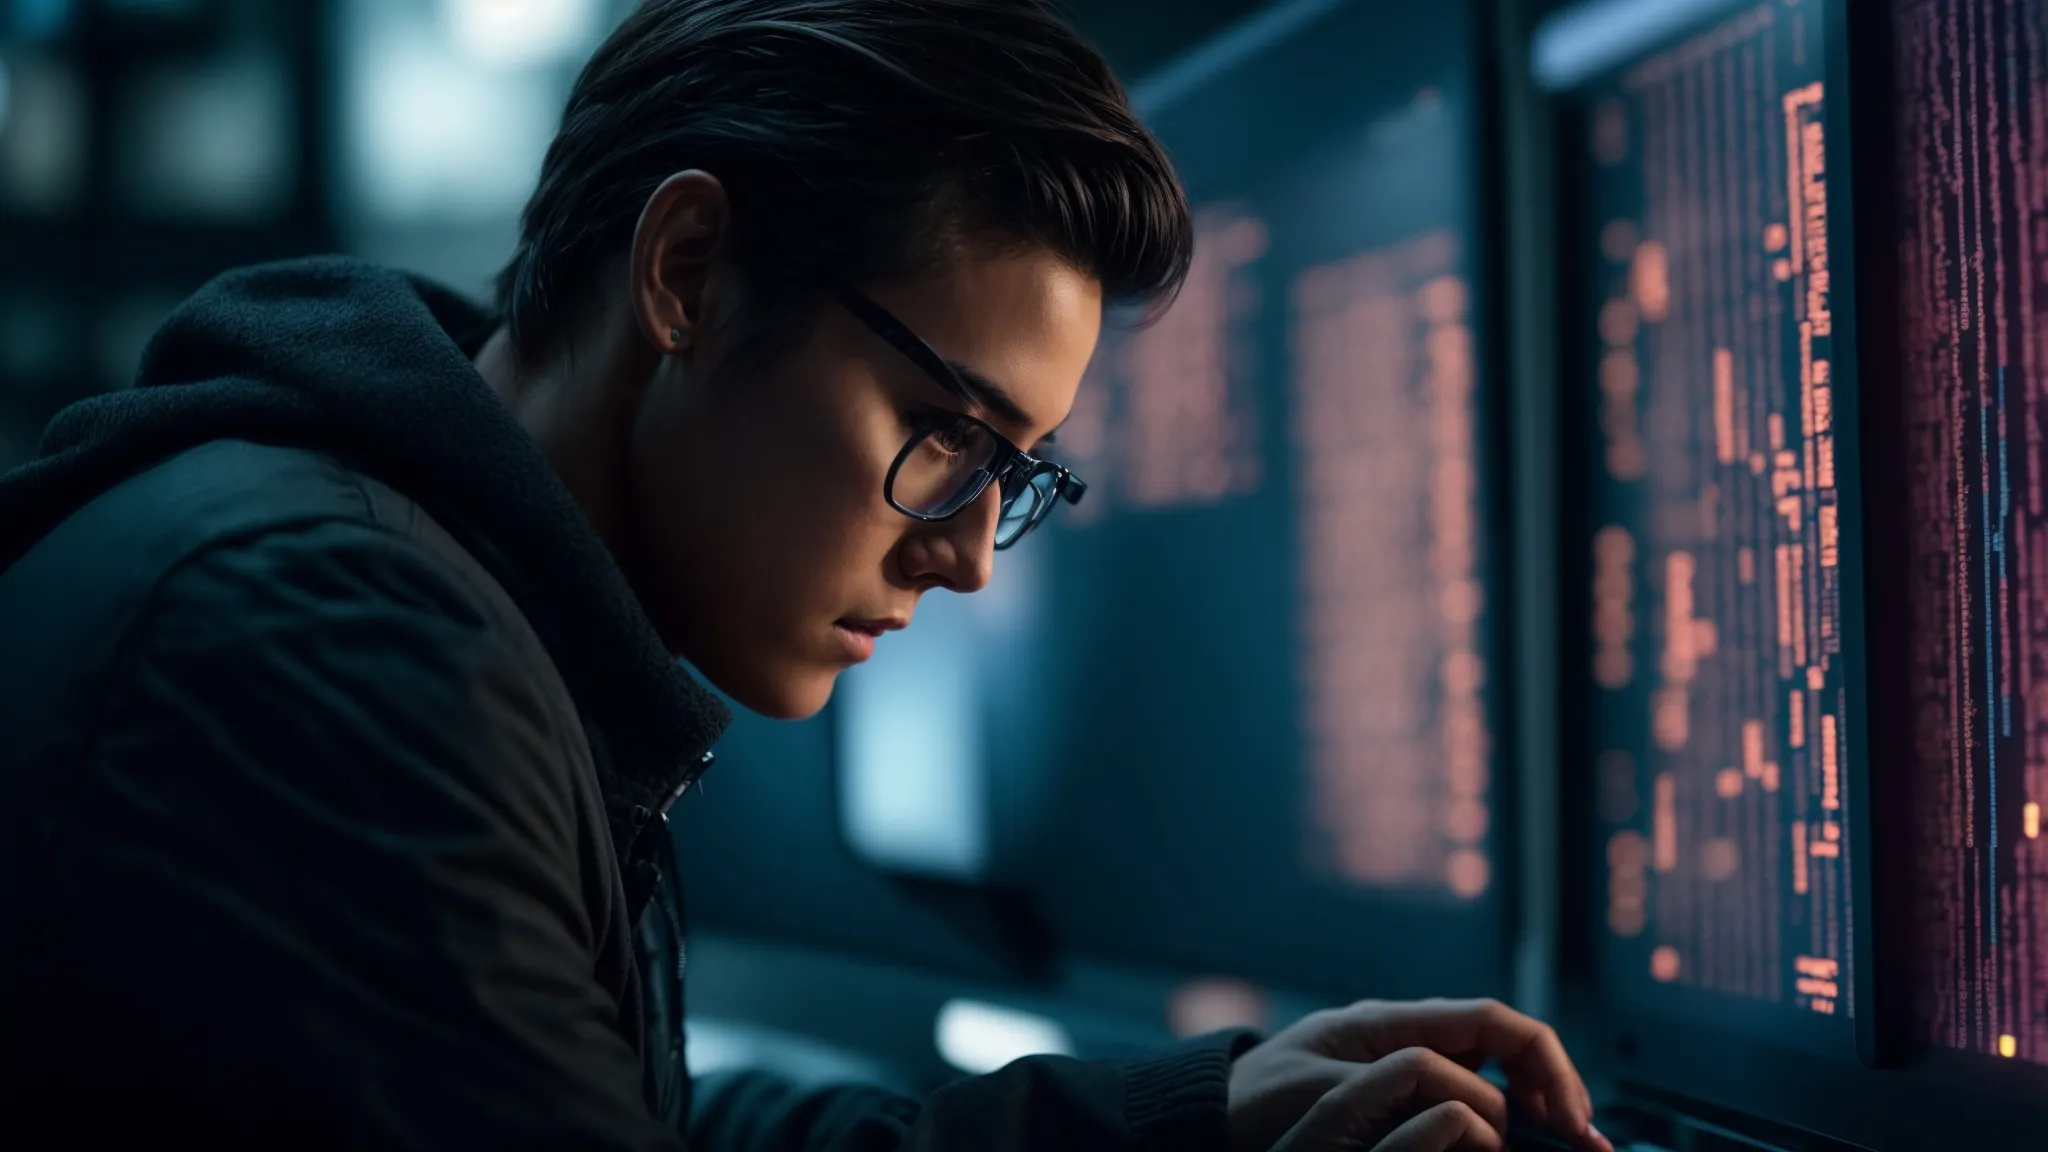 a focused individual intently studies data on a computer screen, highlighting potential keywords amidst a sea of digital information.